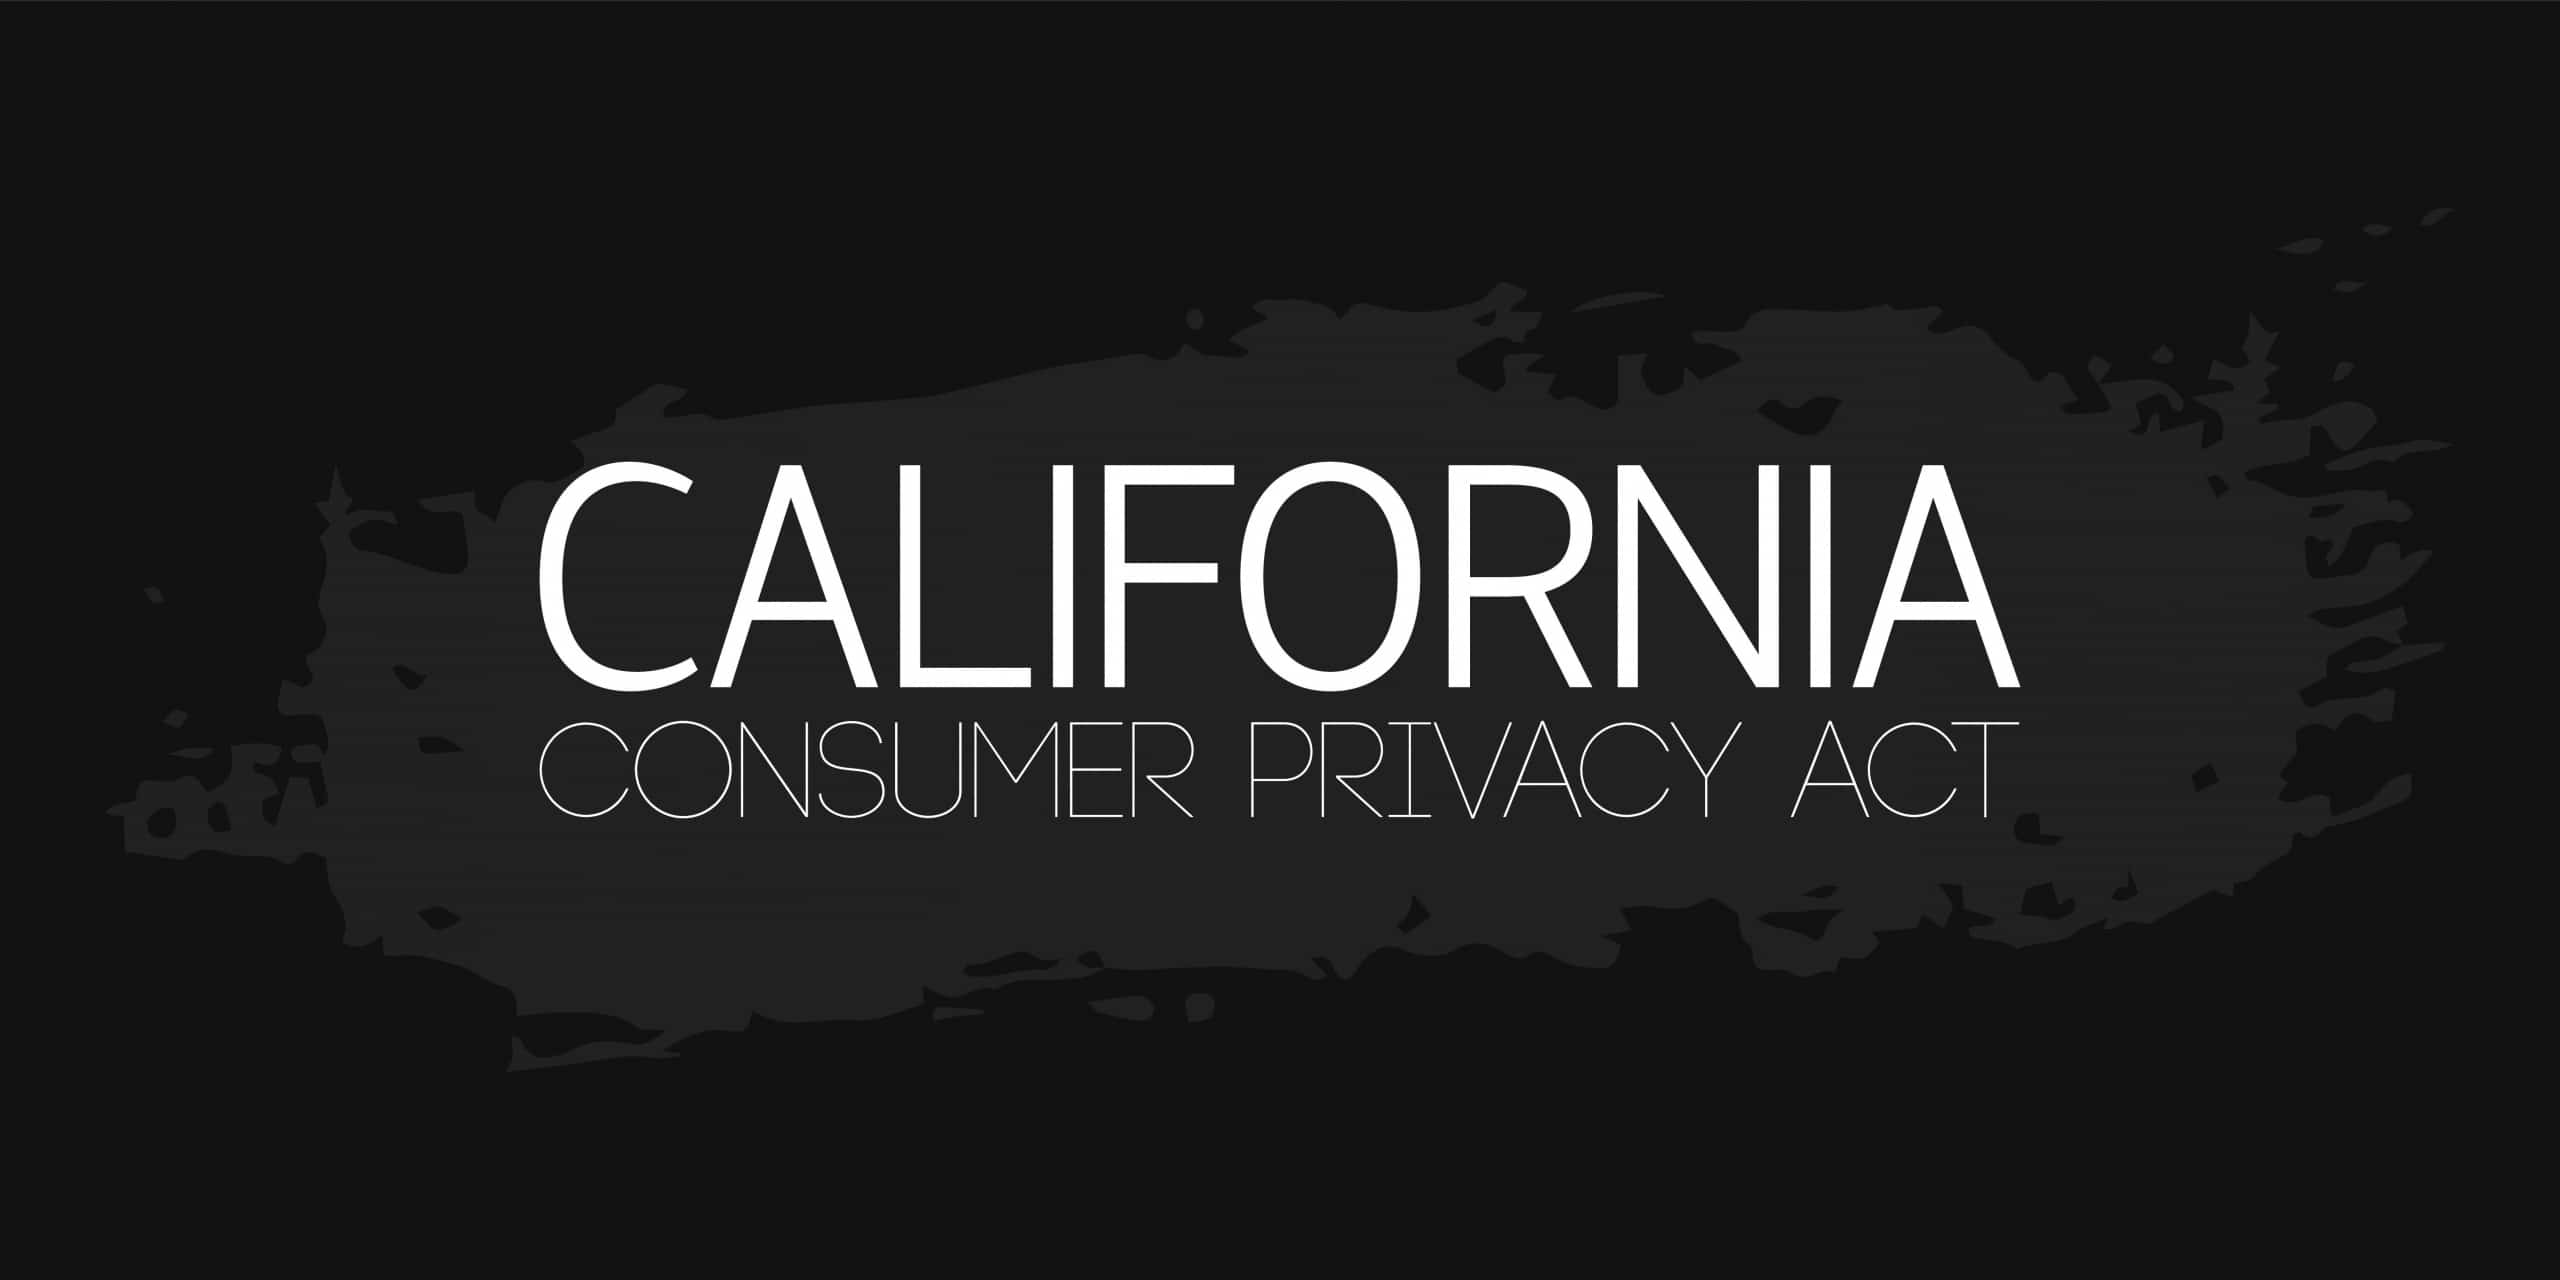 What Does My Privacy Notice Need To Include For CCPA?